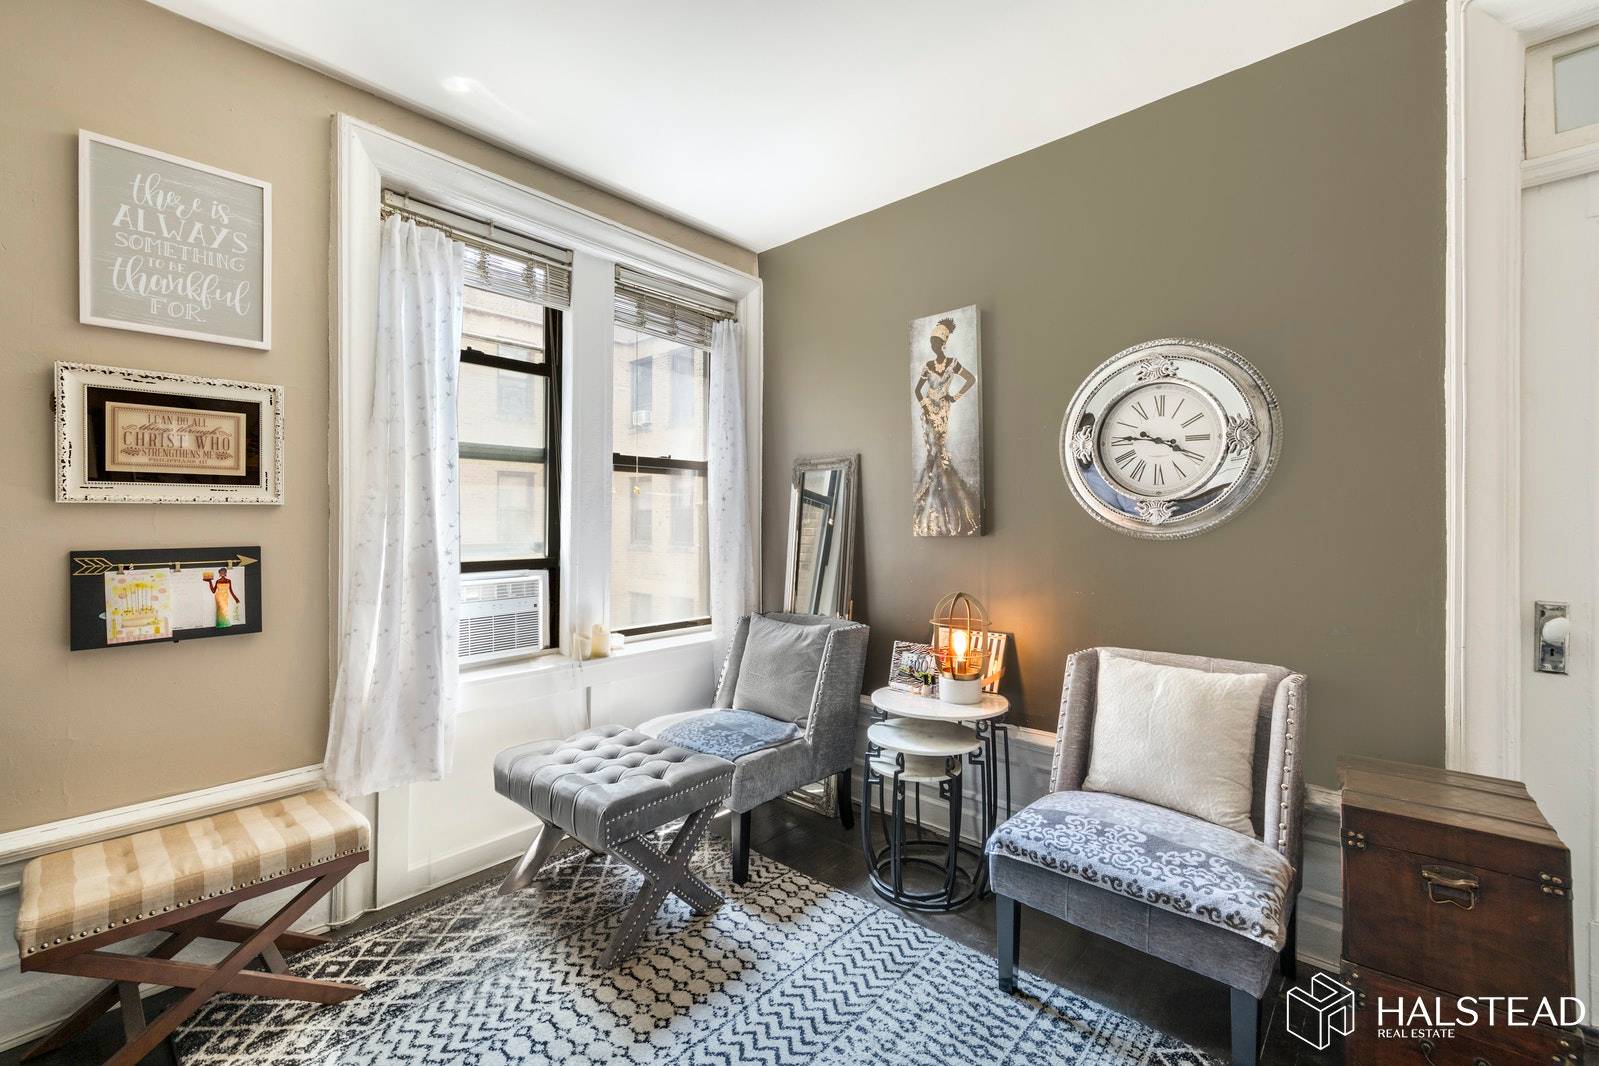 The Perfect Starter Welcome Home to Hudson Heights Upon entering this bright, south east facing gem, one is greeted with a high ceilings and an inviting living room.